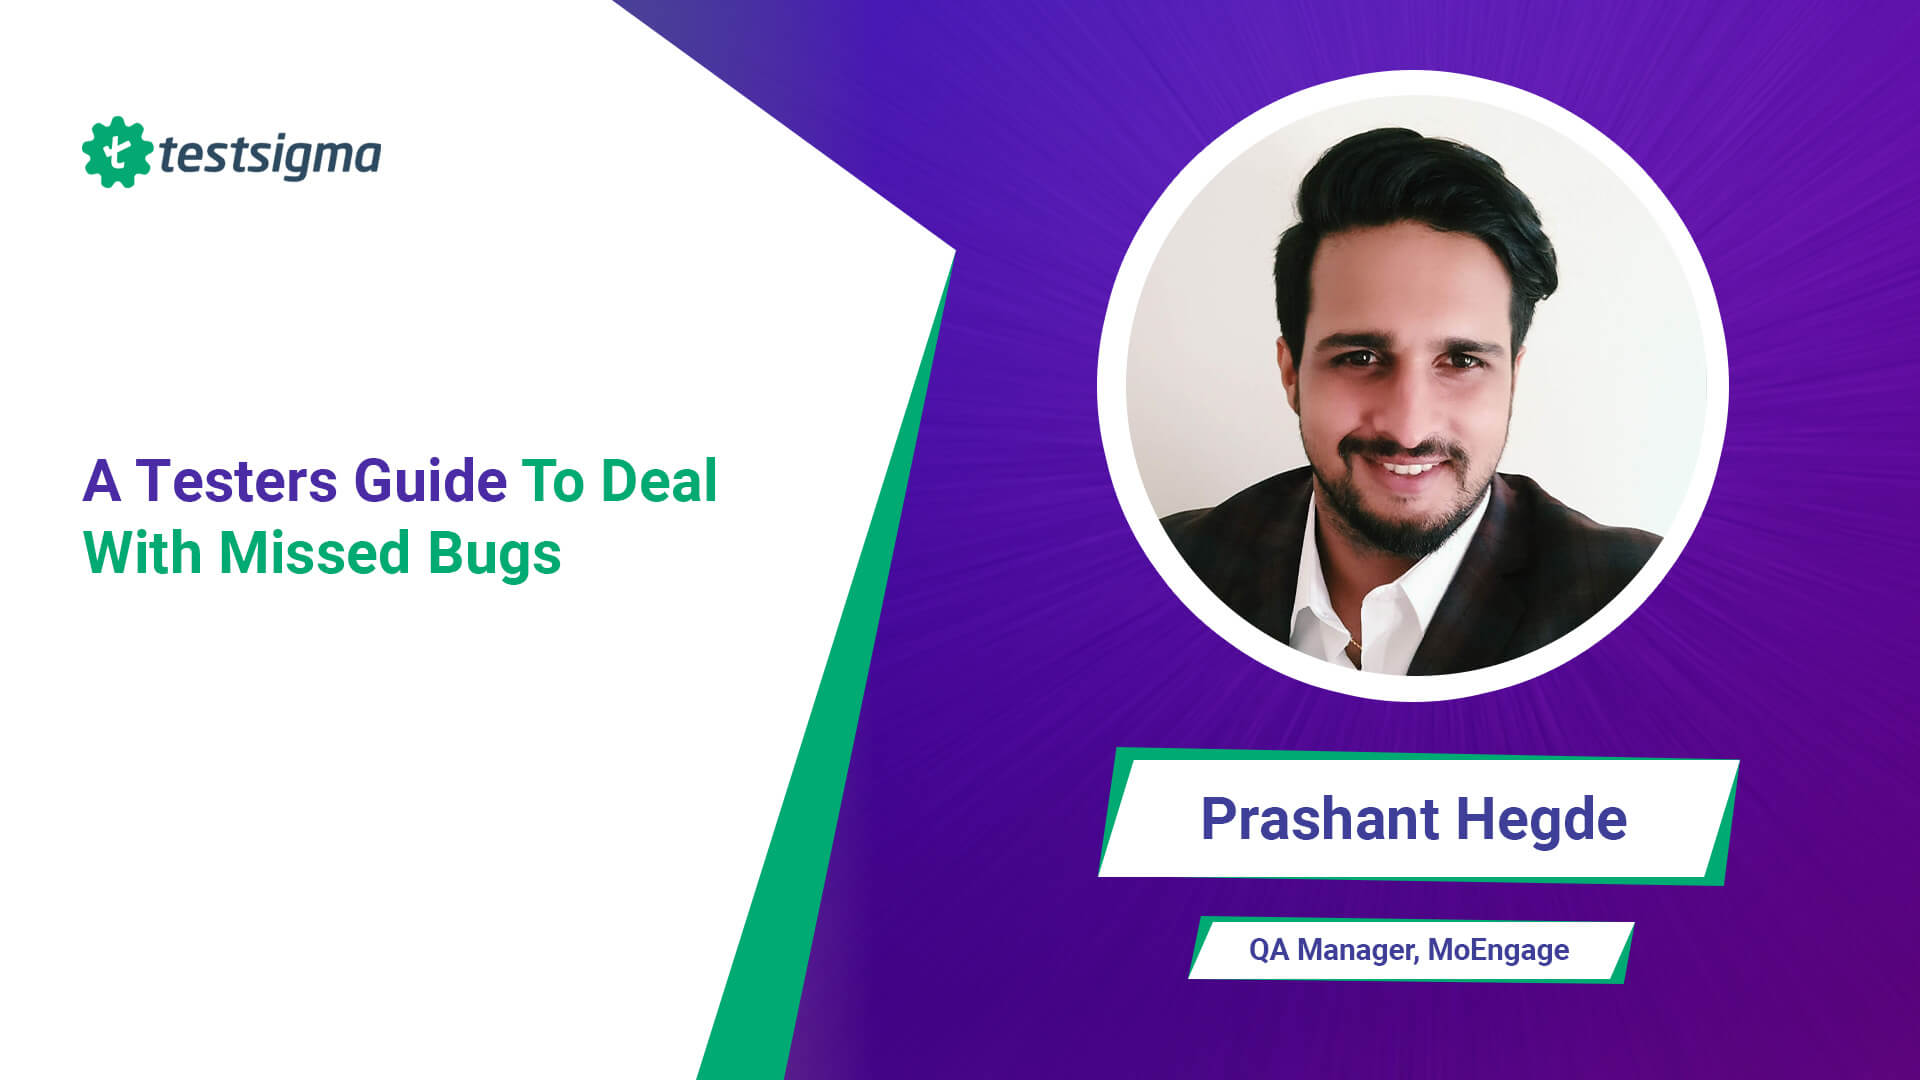 A testers guide to deal with missed bugs